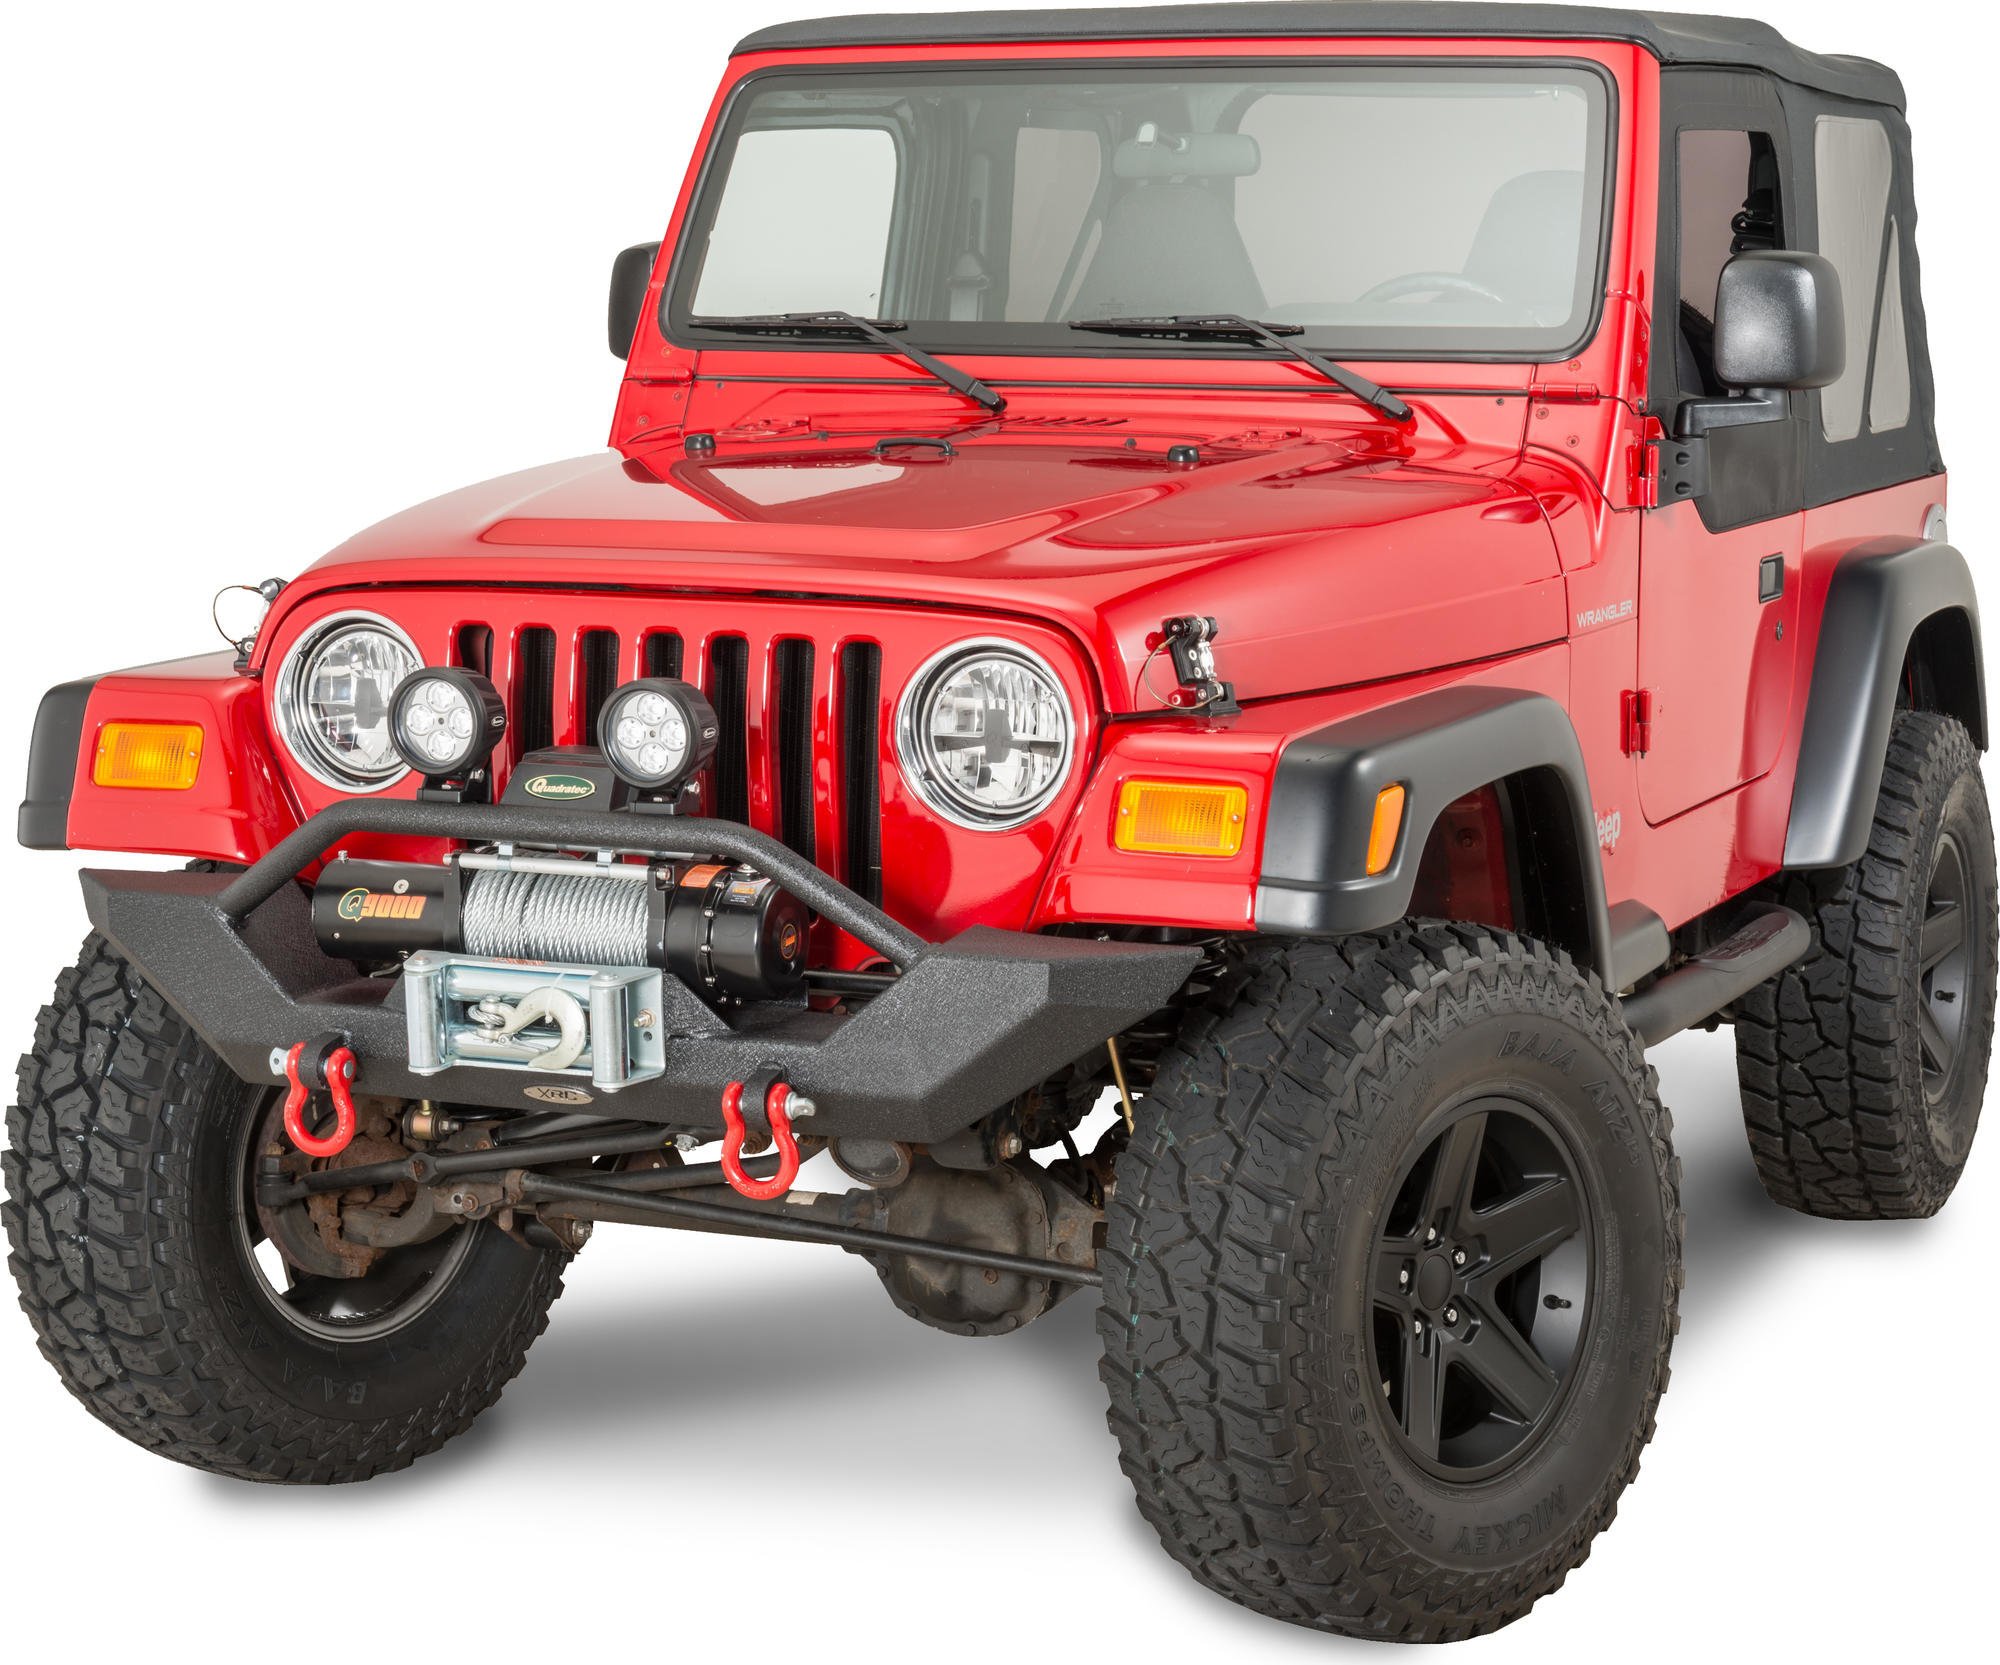 Smittybilt Front XRC Bumper in Textured Black for 87-06 Jeep Wrangler YJ, TJ  & Unlimited | Quadratec